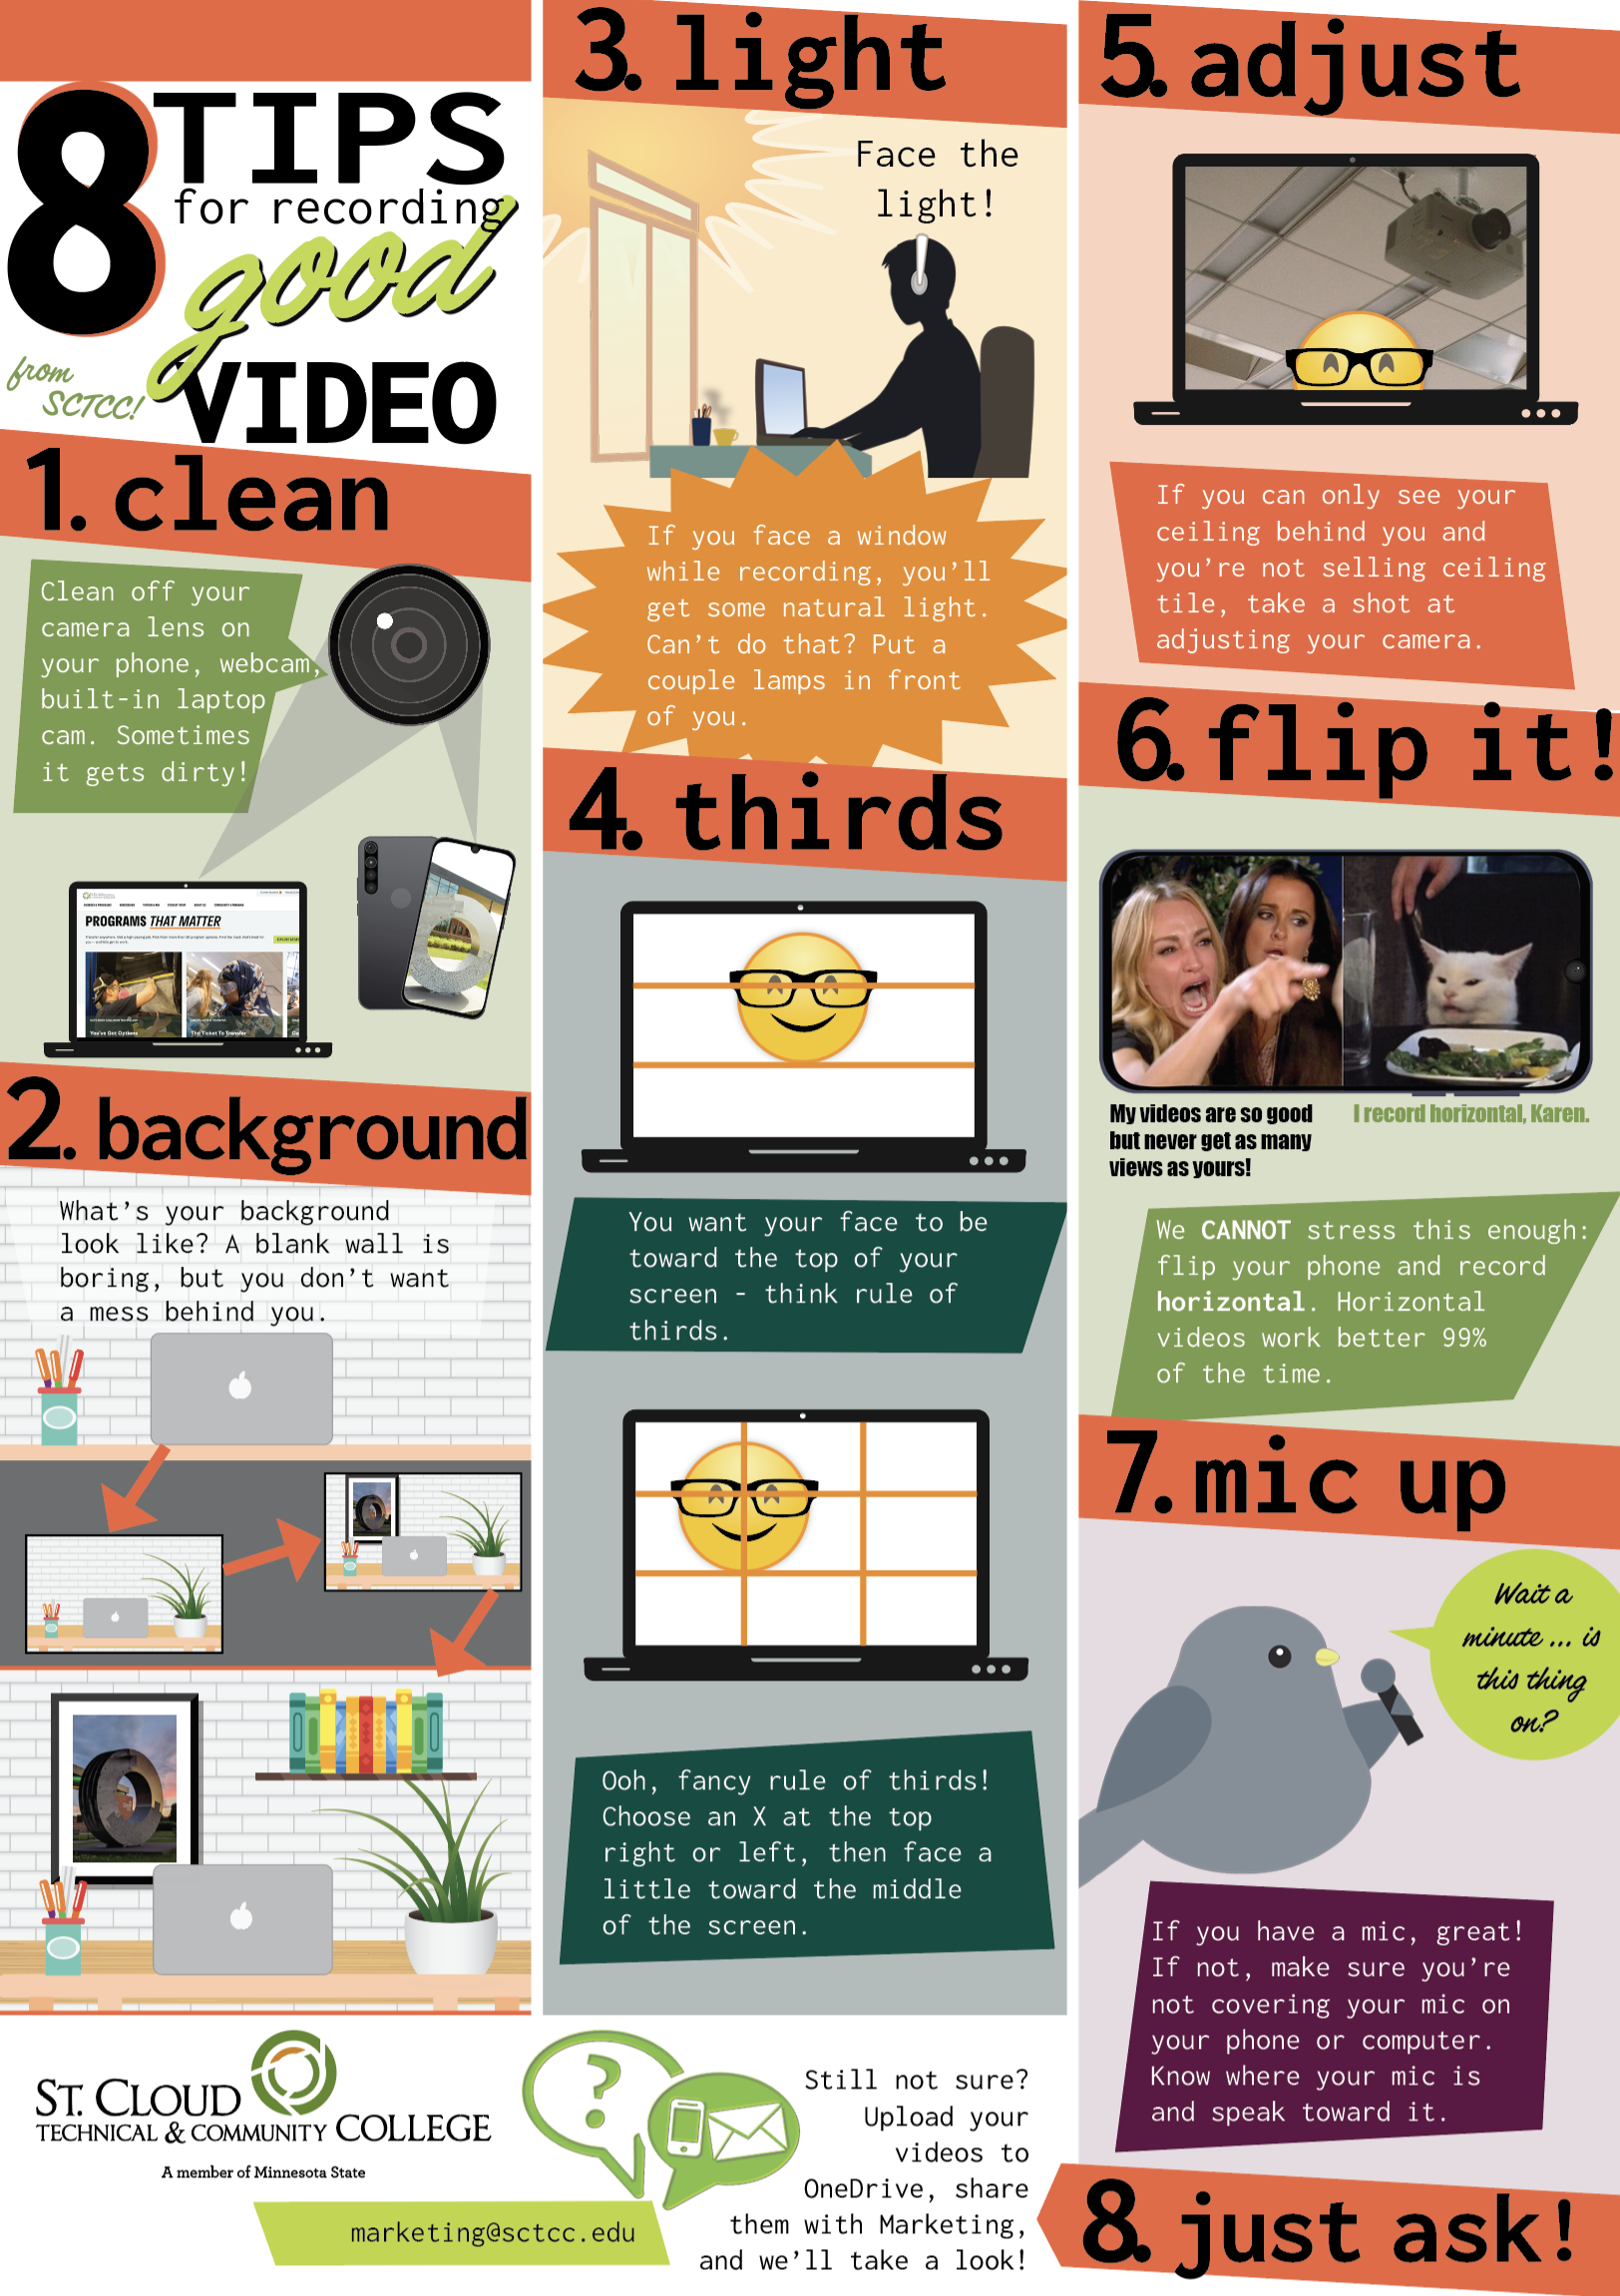 decorative explanation of video tips, click link above to visit page with text